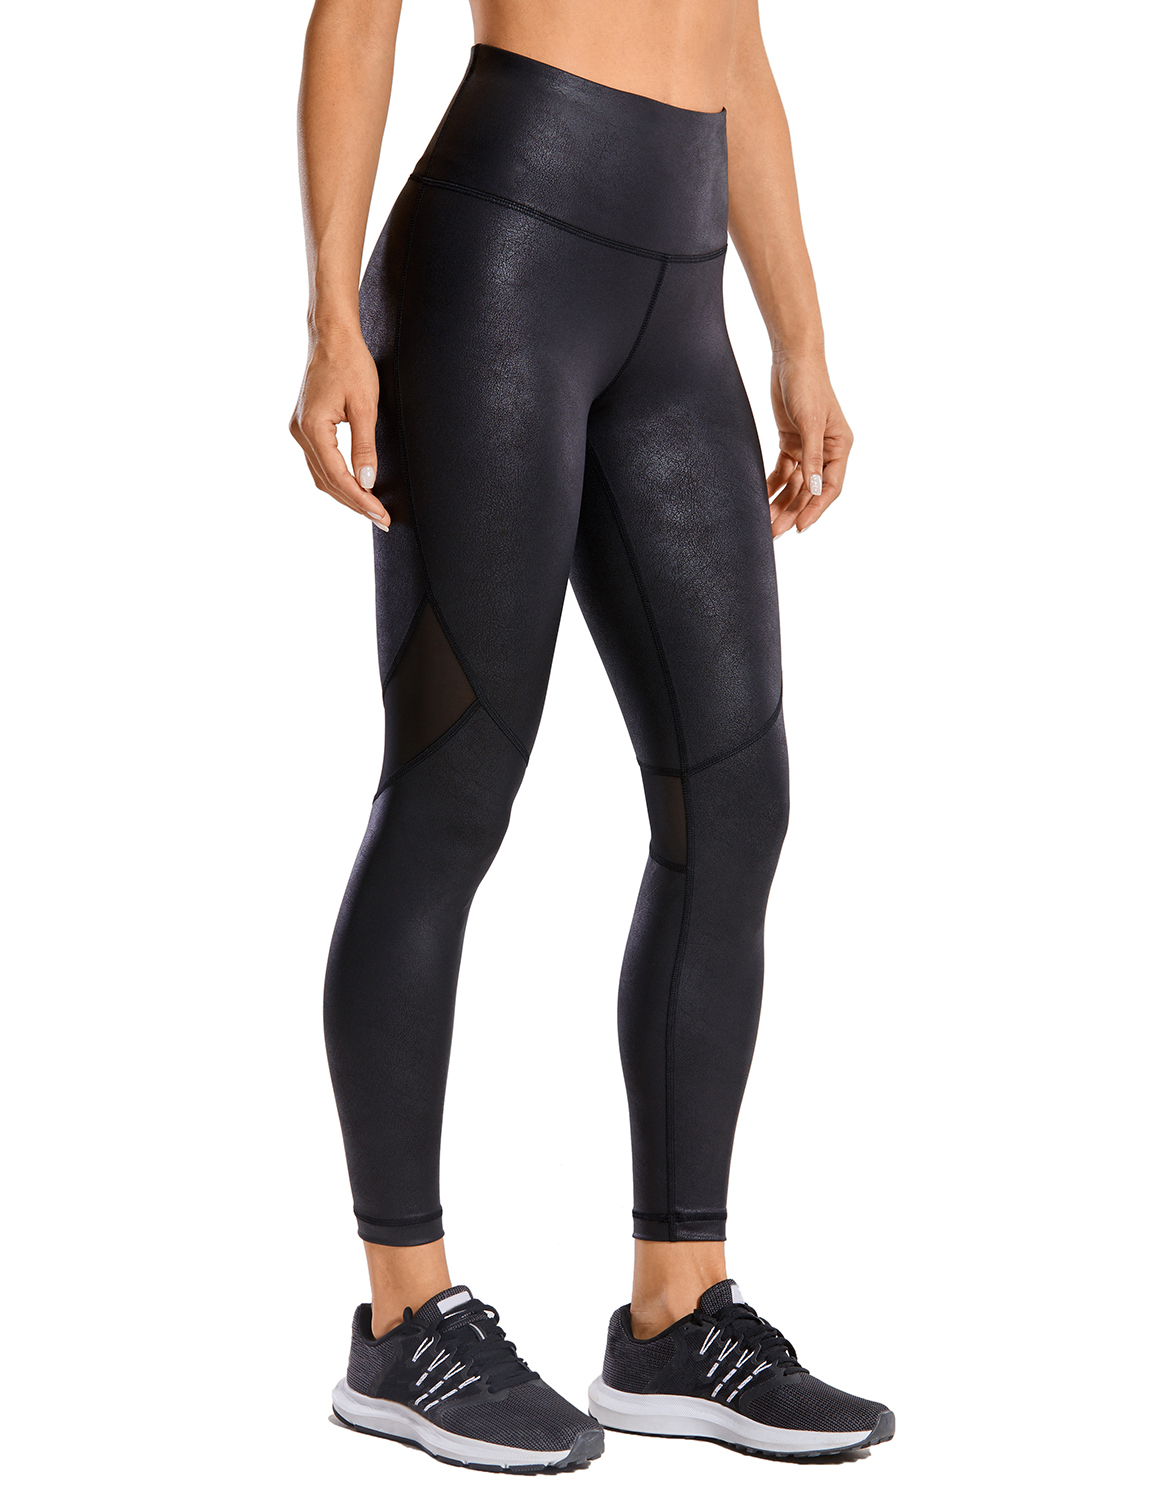  CRZ YOGA Women's Faux Leather Workout Leggings 25 Inches - Mesh Tight  Yoga Athletic Pants with Drawcord Matte Coated Ocean Bue Plain XX-Small :  Clothing, Shoes & Jewelry